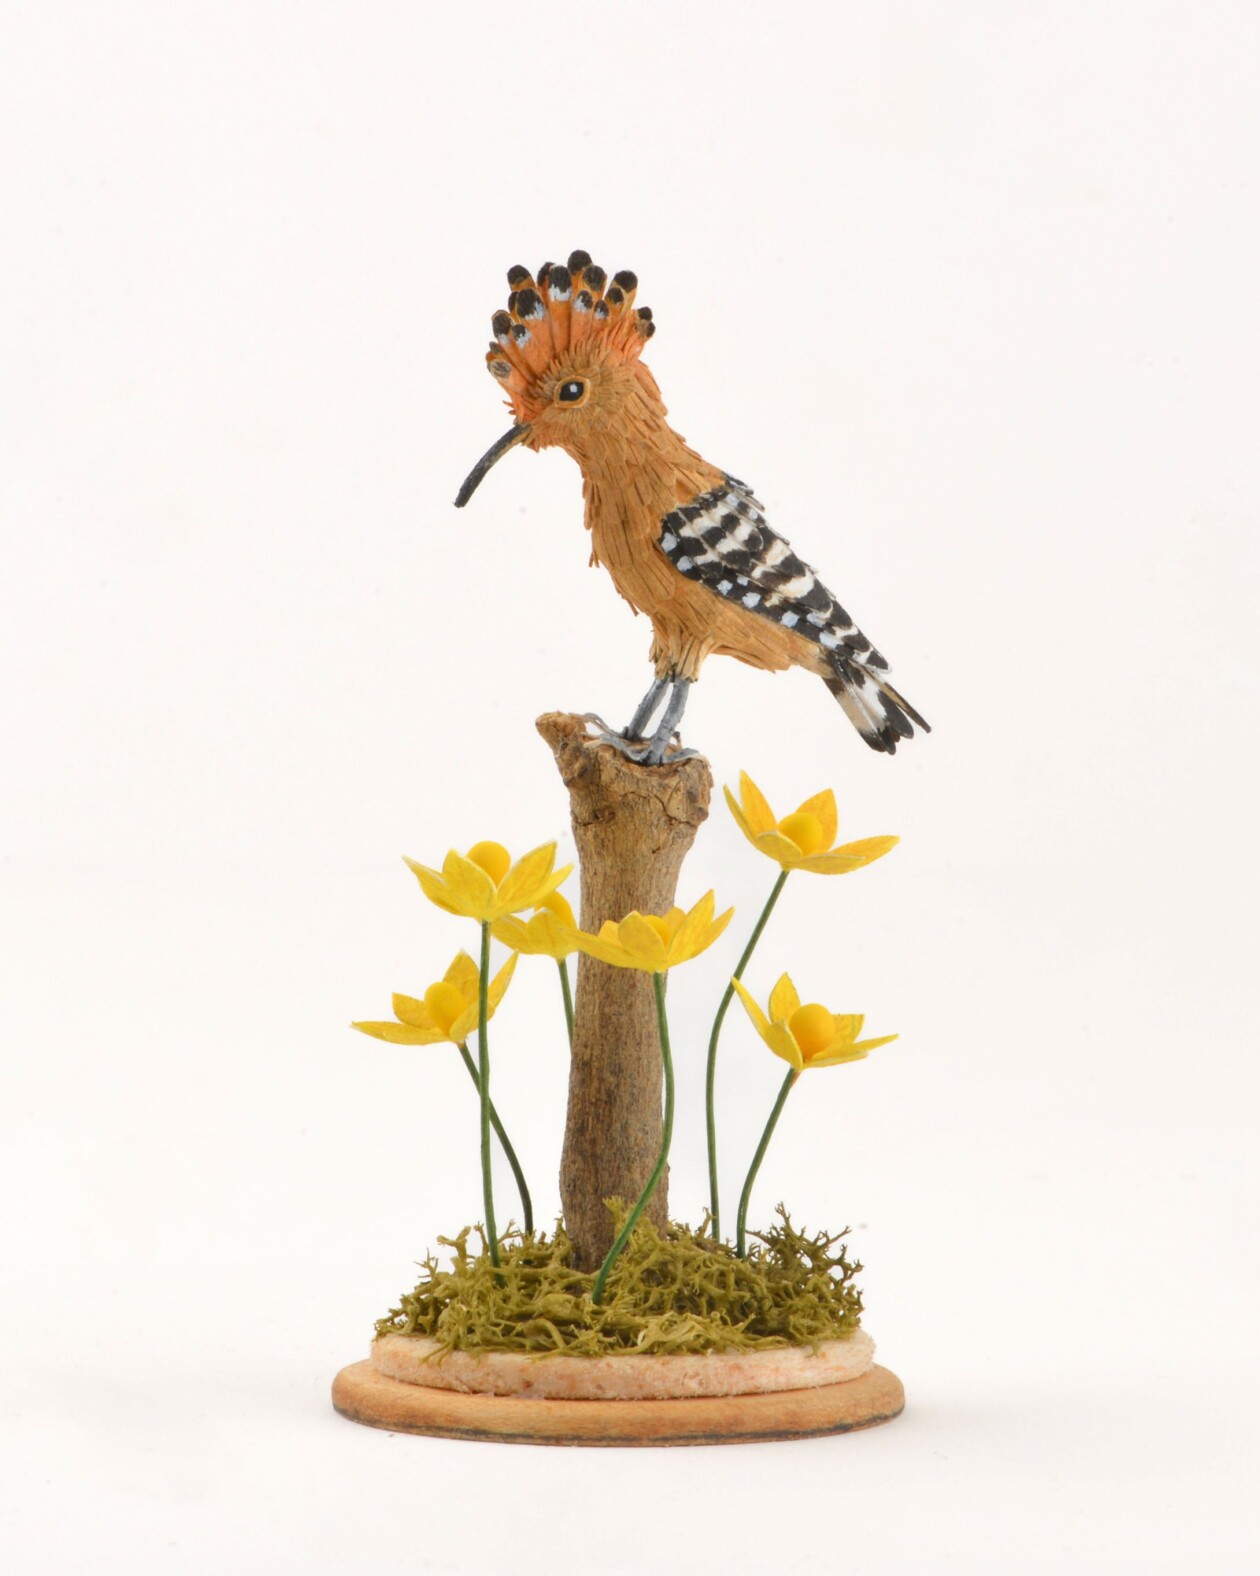 Miniature Bird Paper Sculptures With Whimsical Details By Nayan And Venus (8)